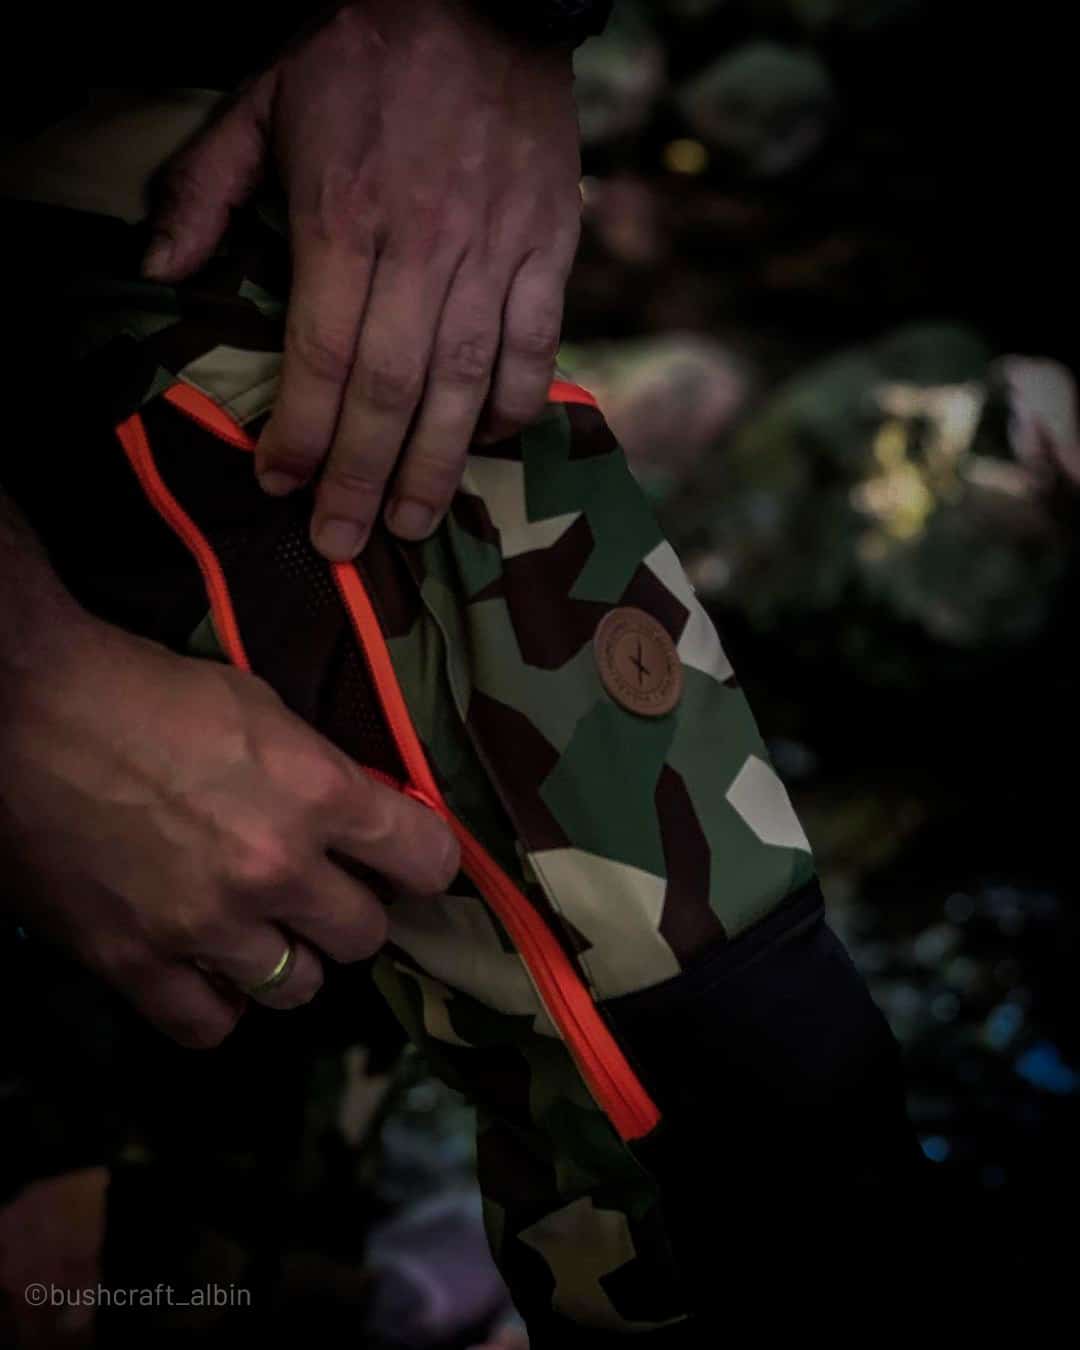 Repo Extreme Nokko Camo outdoor pants for men ventilation opening detail